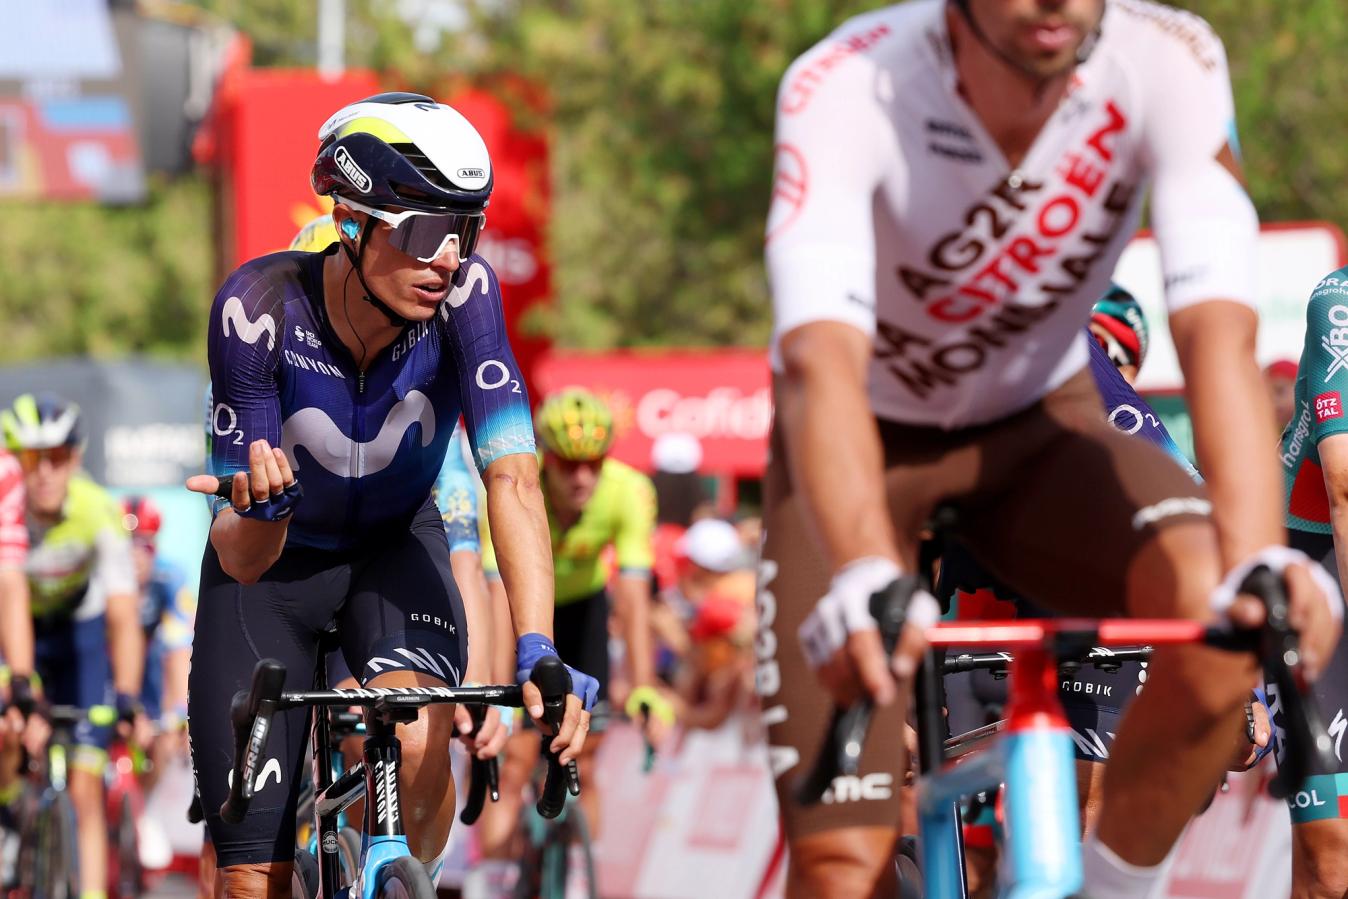 Enric Mas was not aided by the younger Spaniard, Juan Ayuso, overshadowing his efforts at the Vuelta a España